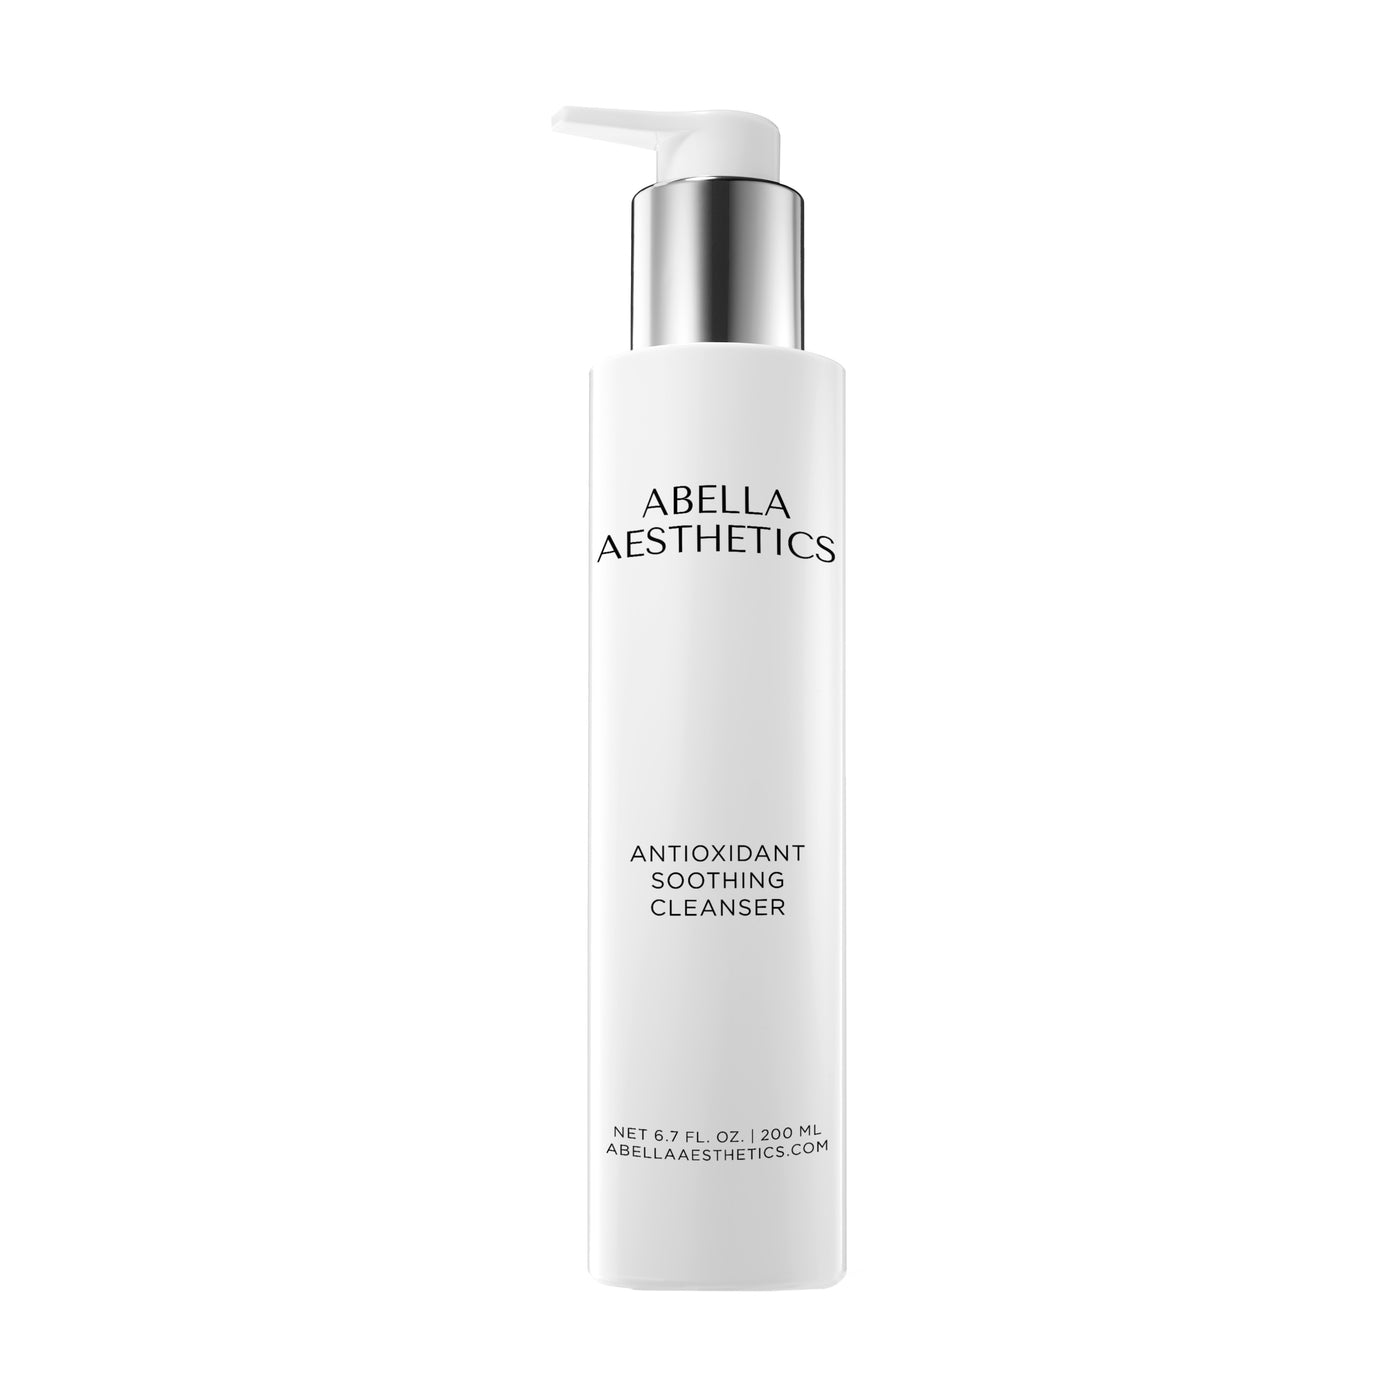 ANTIOXIDANT SOOTHING CLEANSER